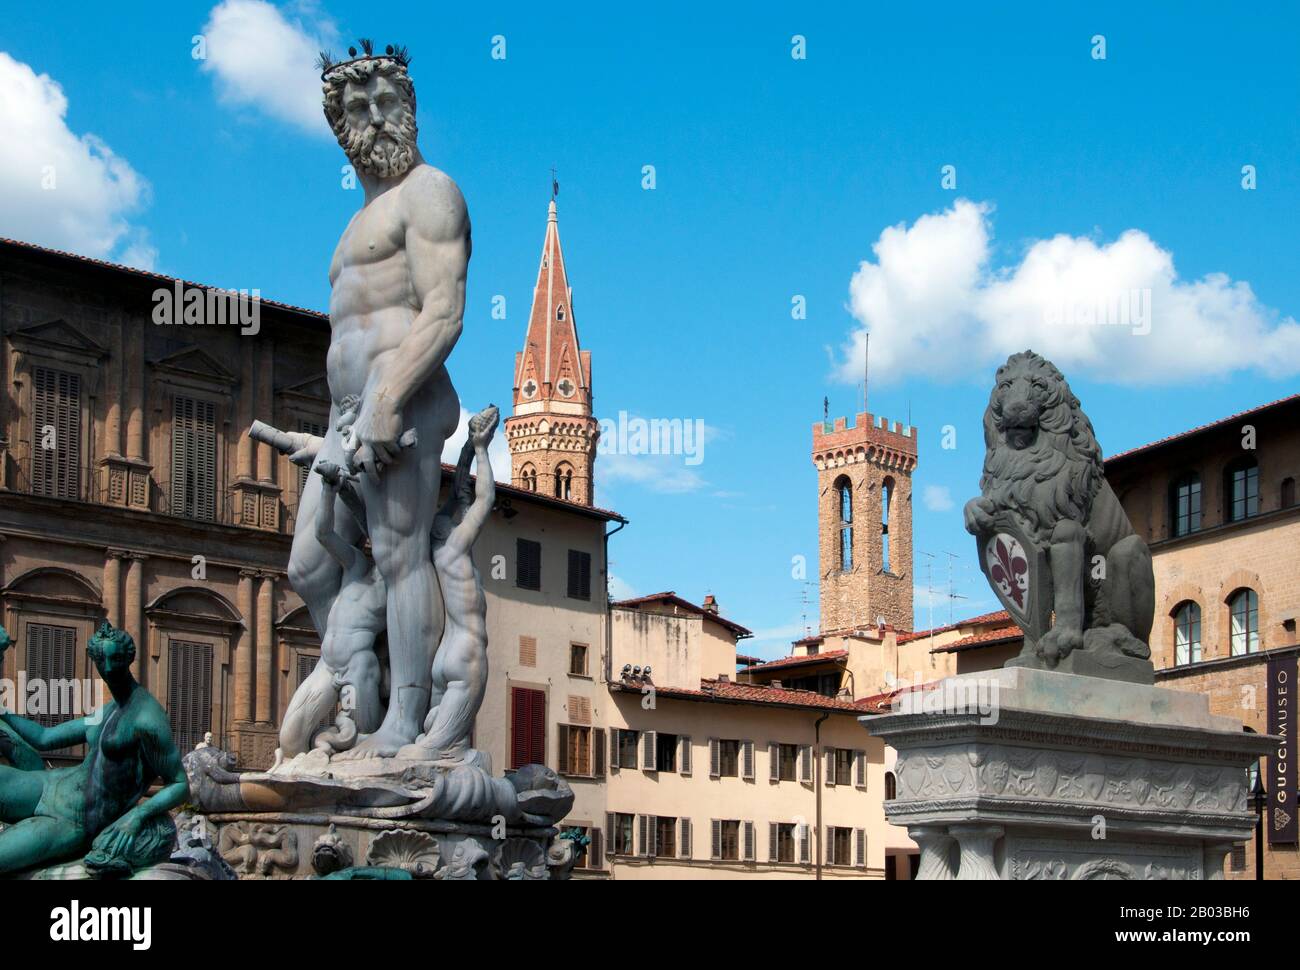 Italy: A marble statue portraying 'Neptune', the Fountain of Neptune, Piazza della Signoria, Florence. Sculpted by Bartolomeo Ammannati (1511 - 1592), 1565. Neptune is the god of freshwater and the sea in Roman religion. He is the counterpart of the Greek god Poseidon. In the Greek-influenced tradition, Neptune is the brother of Jupiter and Pluto; the brothers preside over the realms of Heaven, the earthly world, and the Underworld. Salacia is his wife. Stock Photo